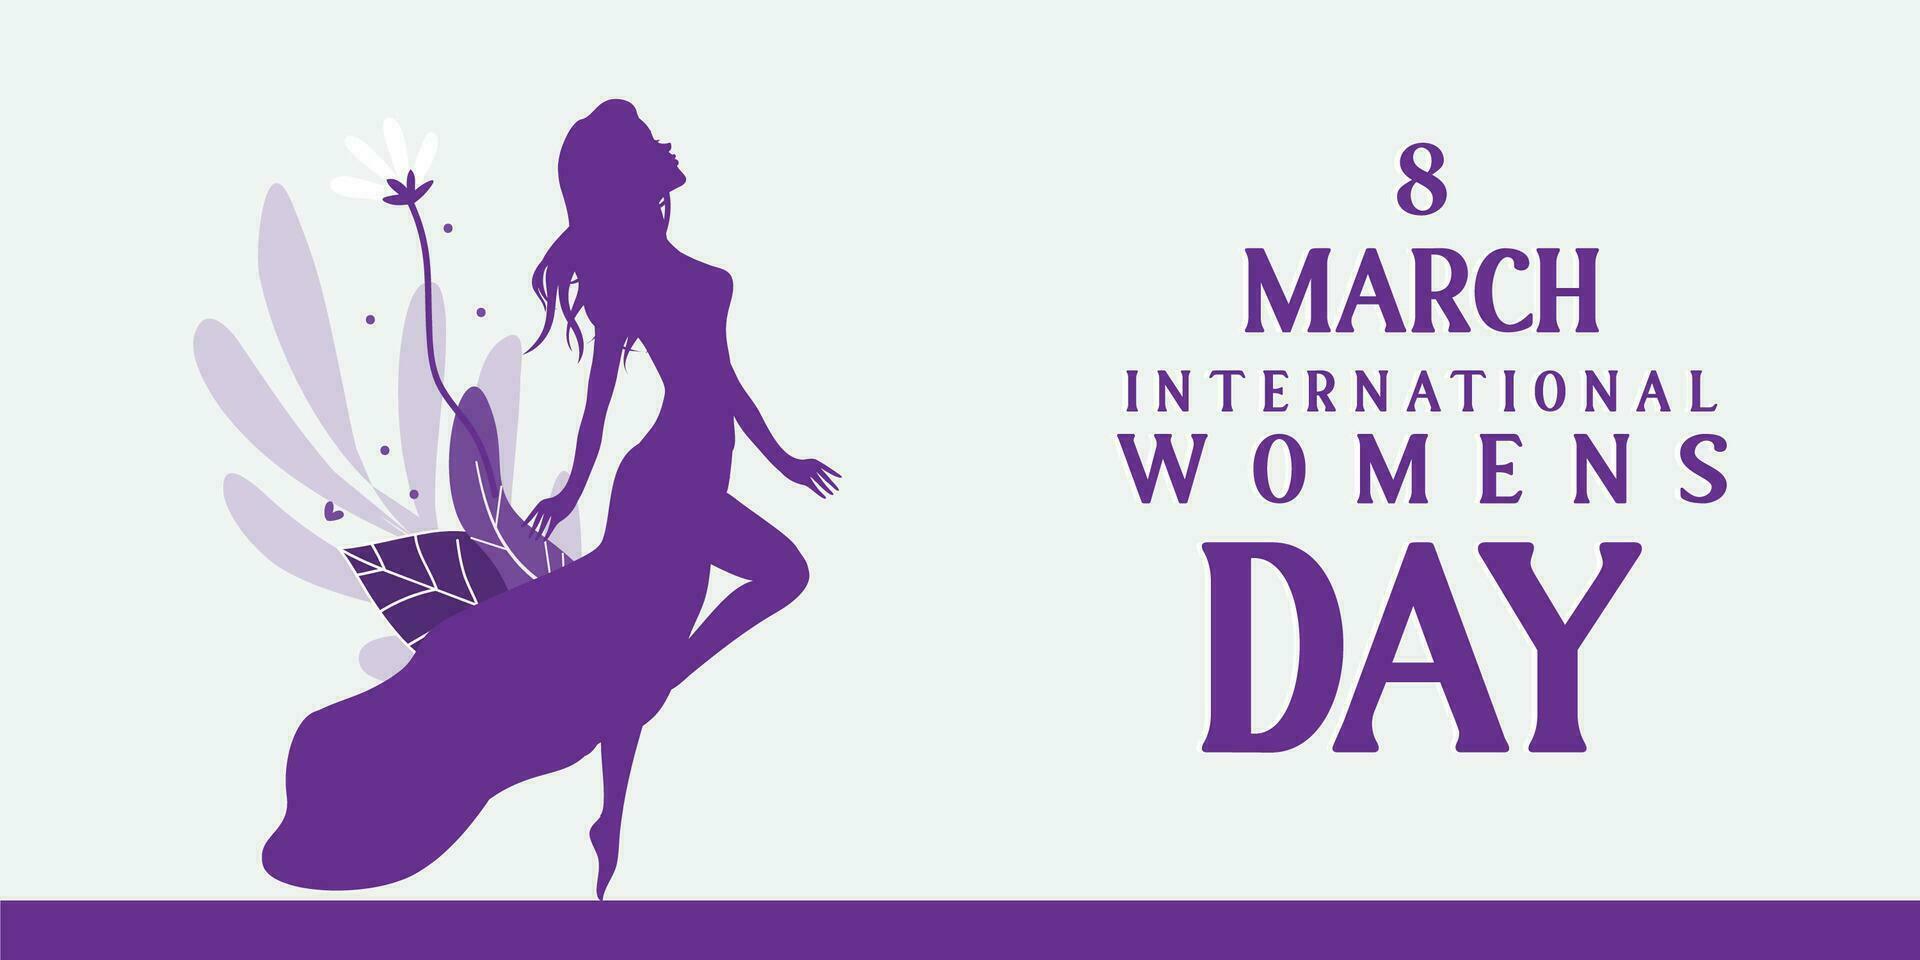 happy women's day greeting background vector